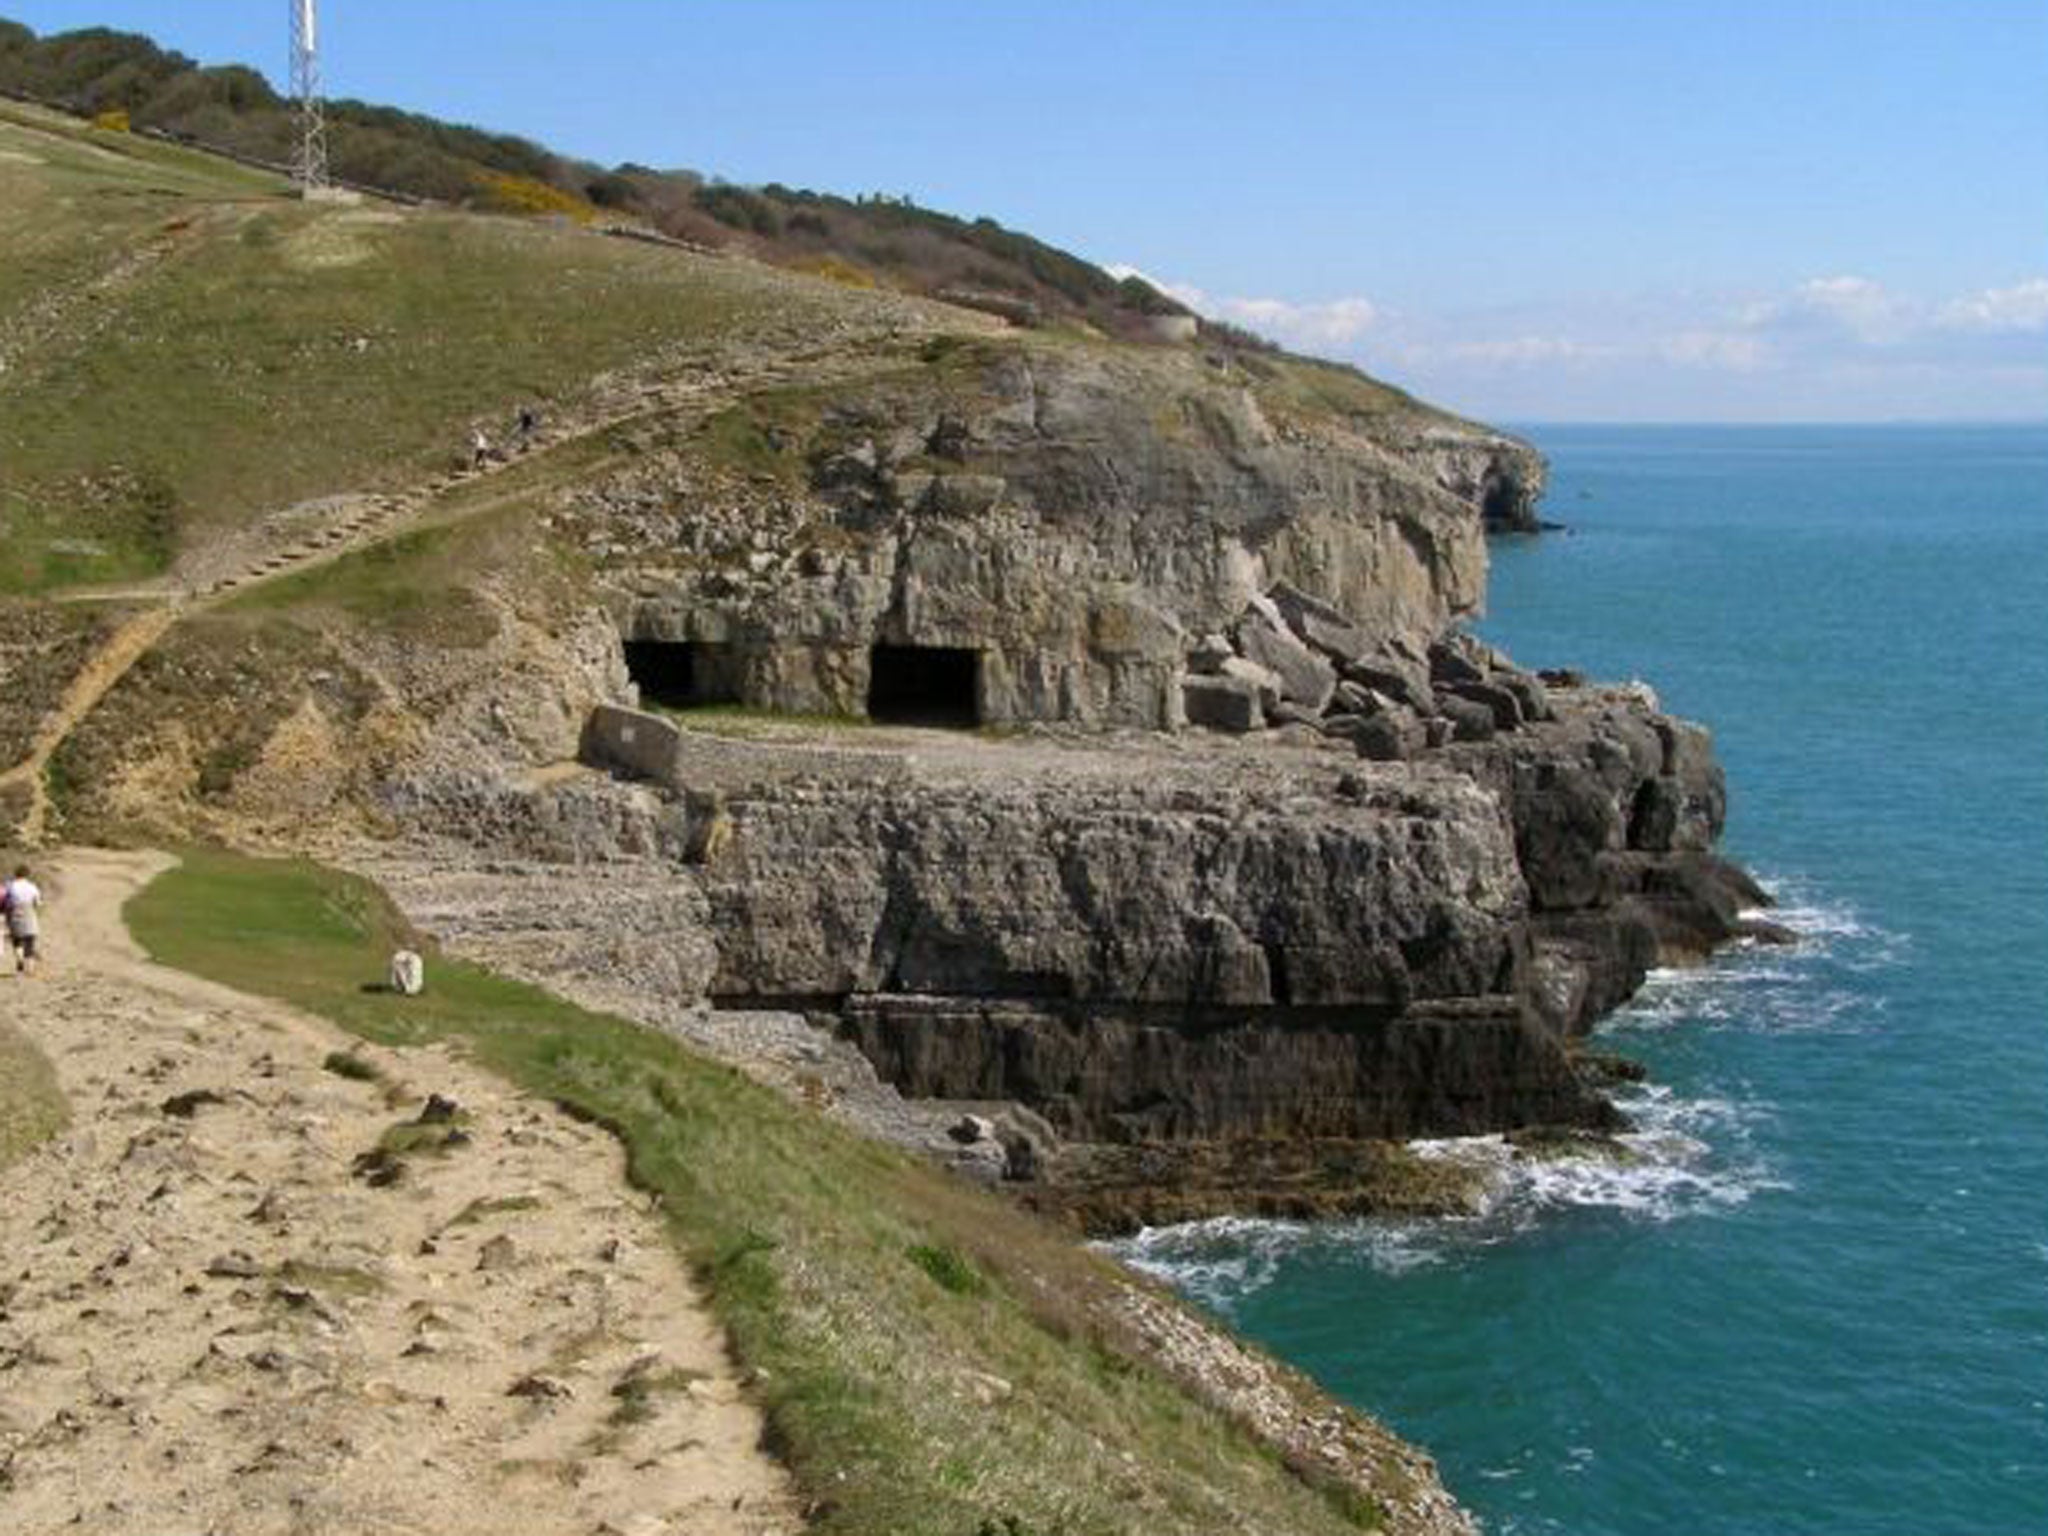 The Tilly Whim caves in Dorset